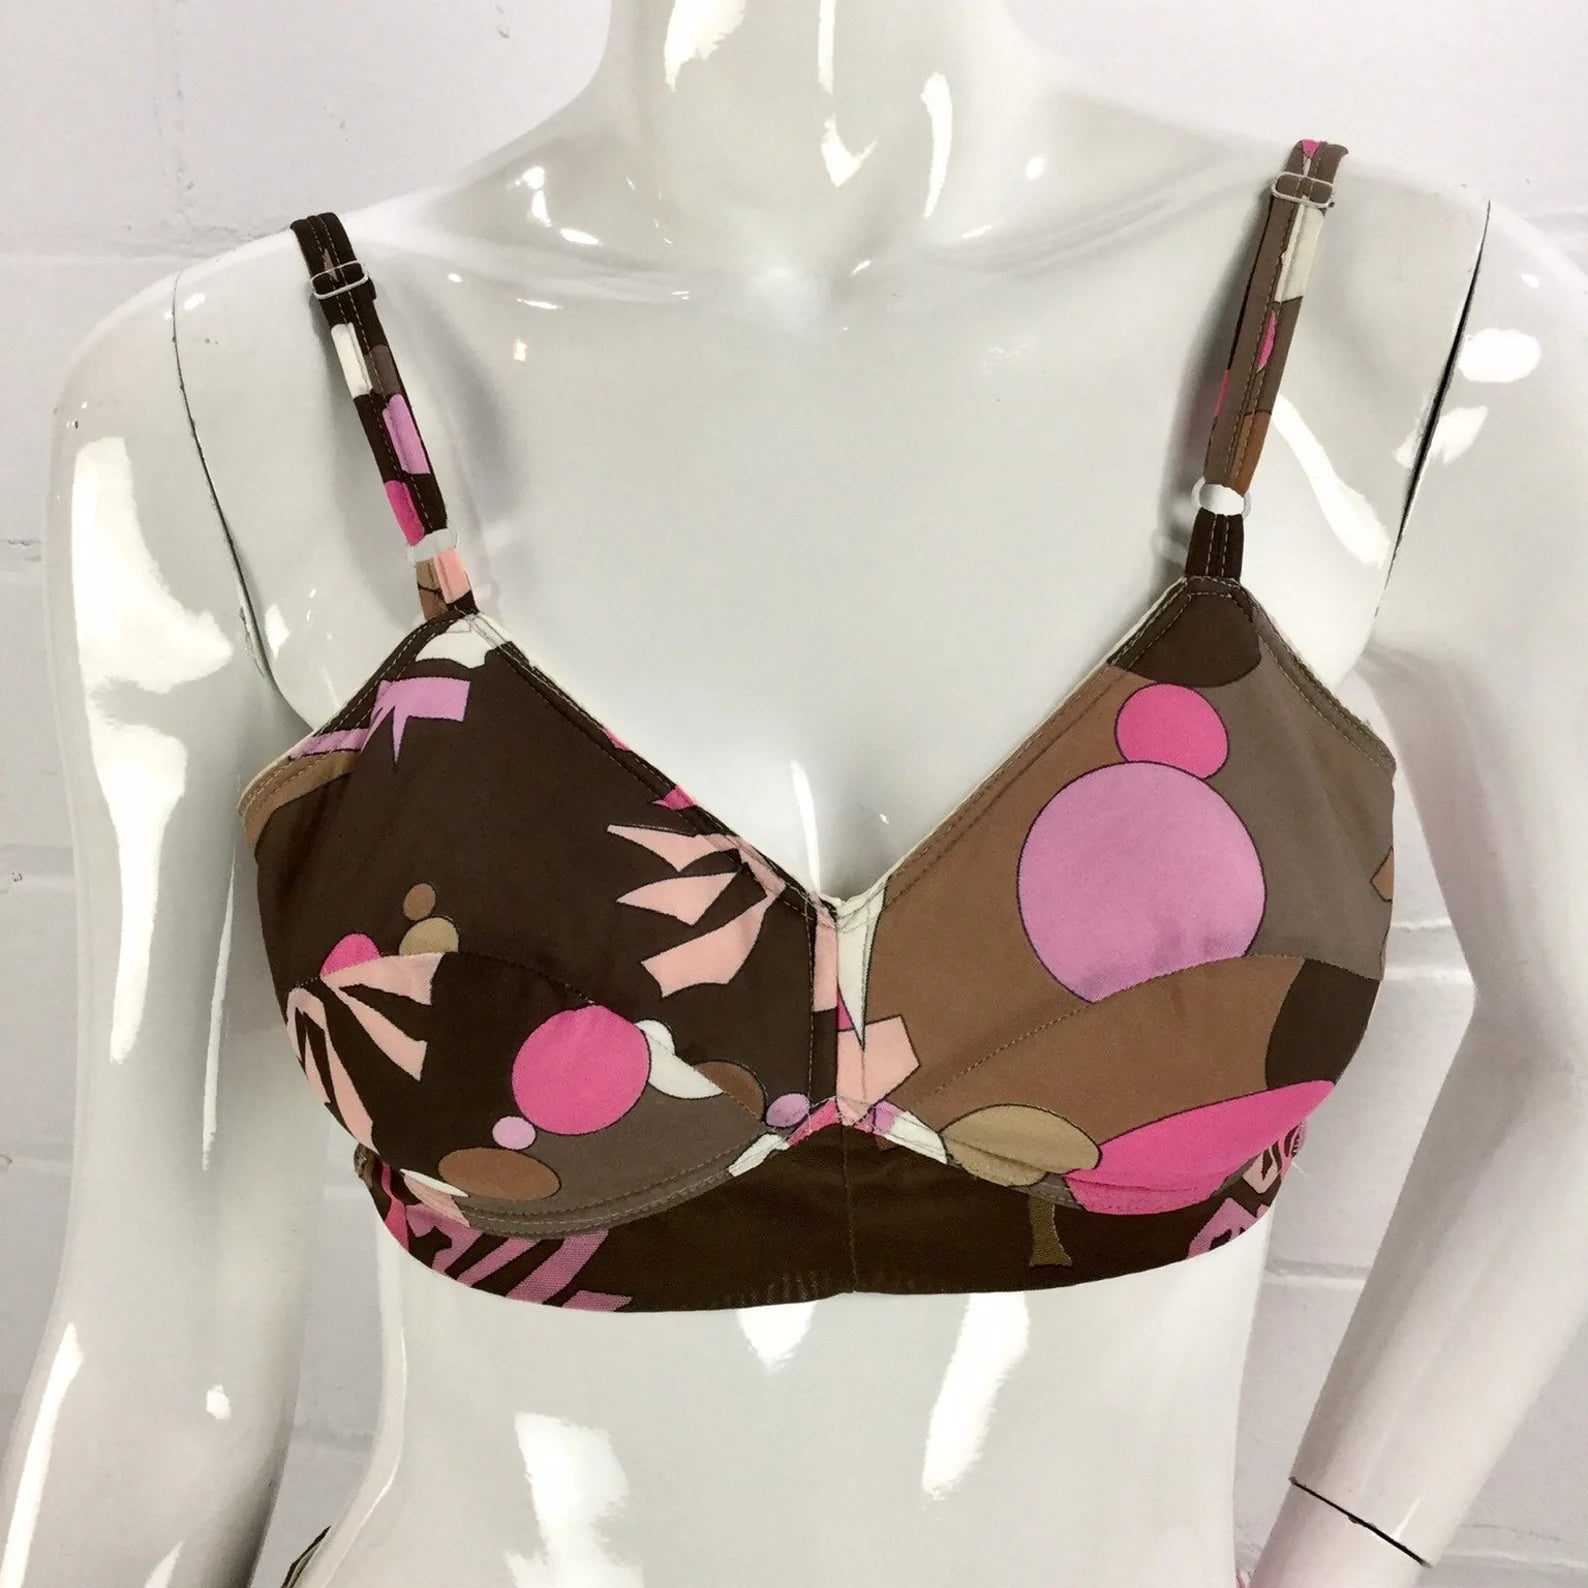 1960s/70s Emilio Pucci Lingerie Set, Vintage Pucci, Pink & Brown Abstract Print Bra Panties and Slip, Psychedelic Mod Pucci Underwear